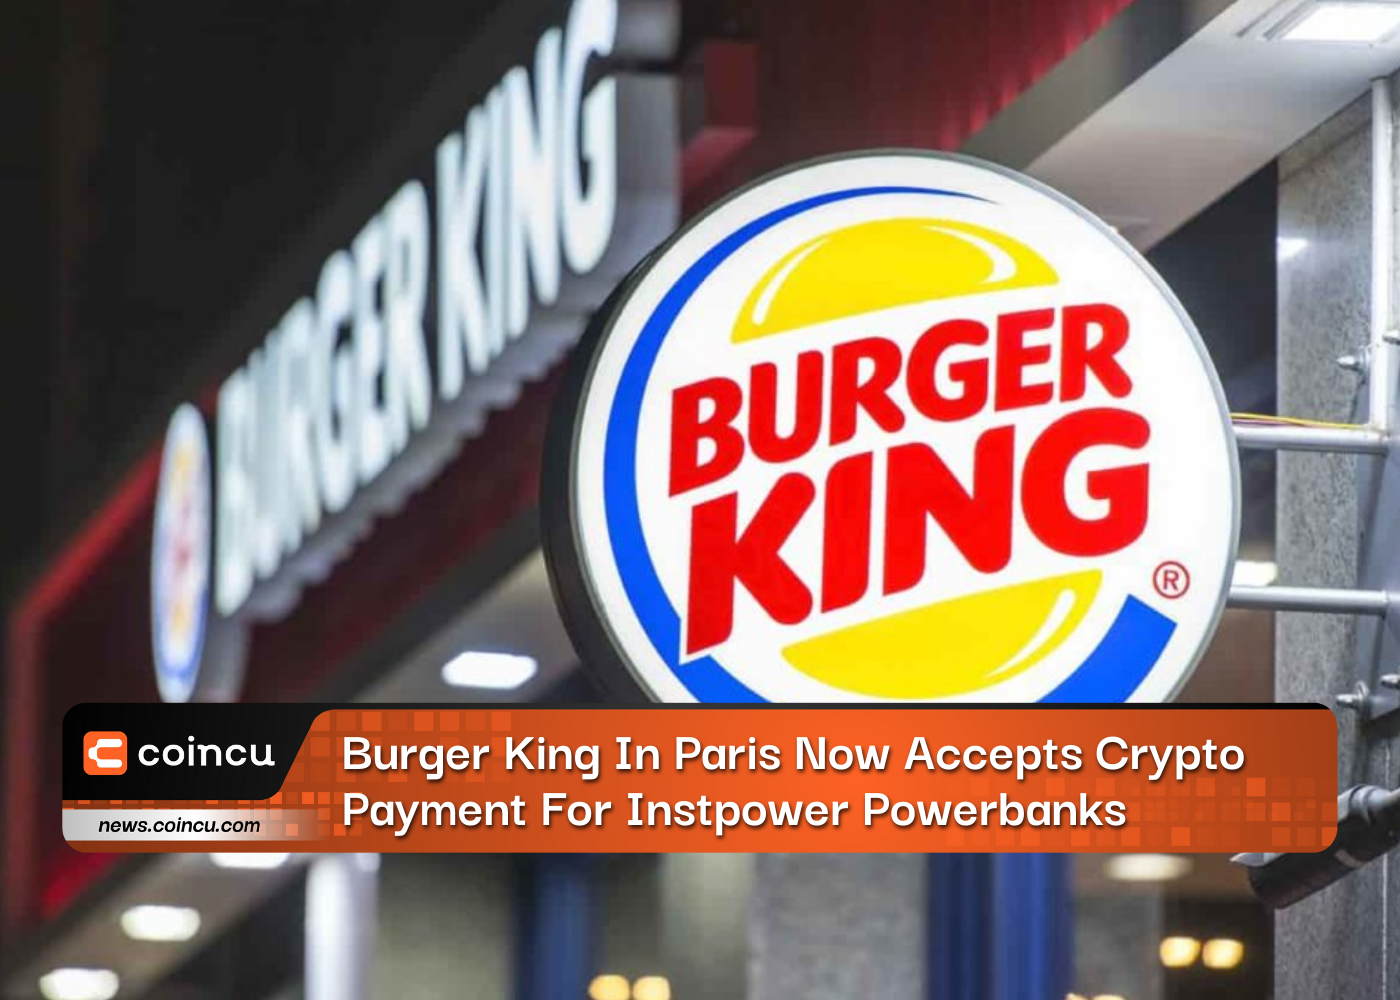 Burger King In Paris Now Accepts Crypto Payment For Instpower Powerbanks